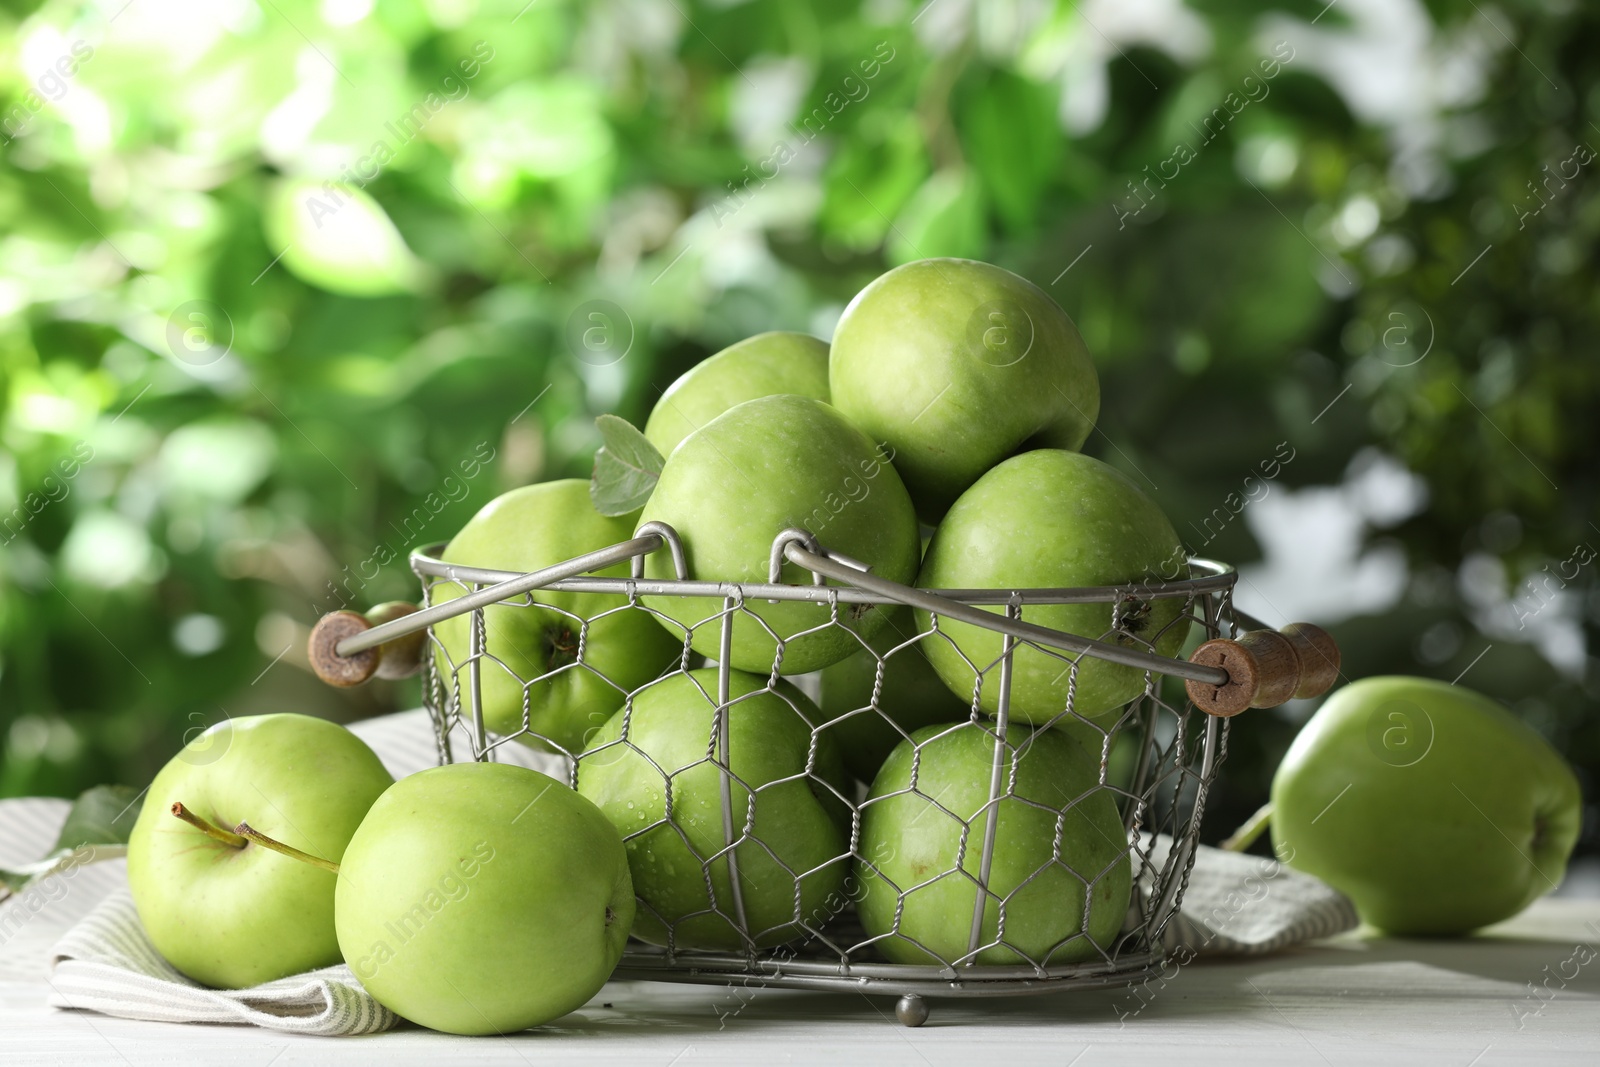 Photo of Metal basket with ripe green apples on white table outdoors